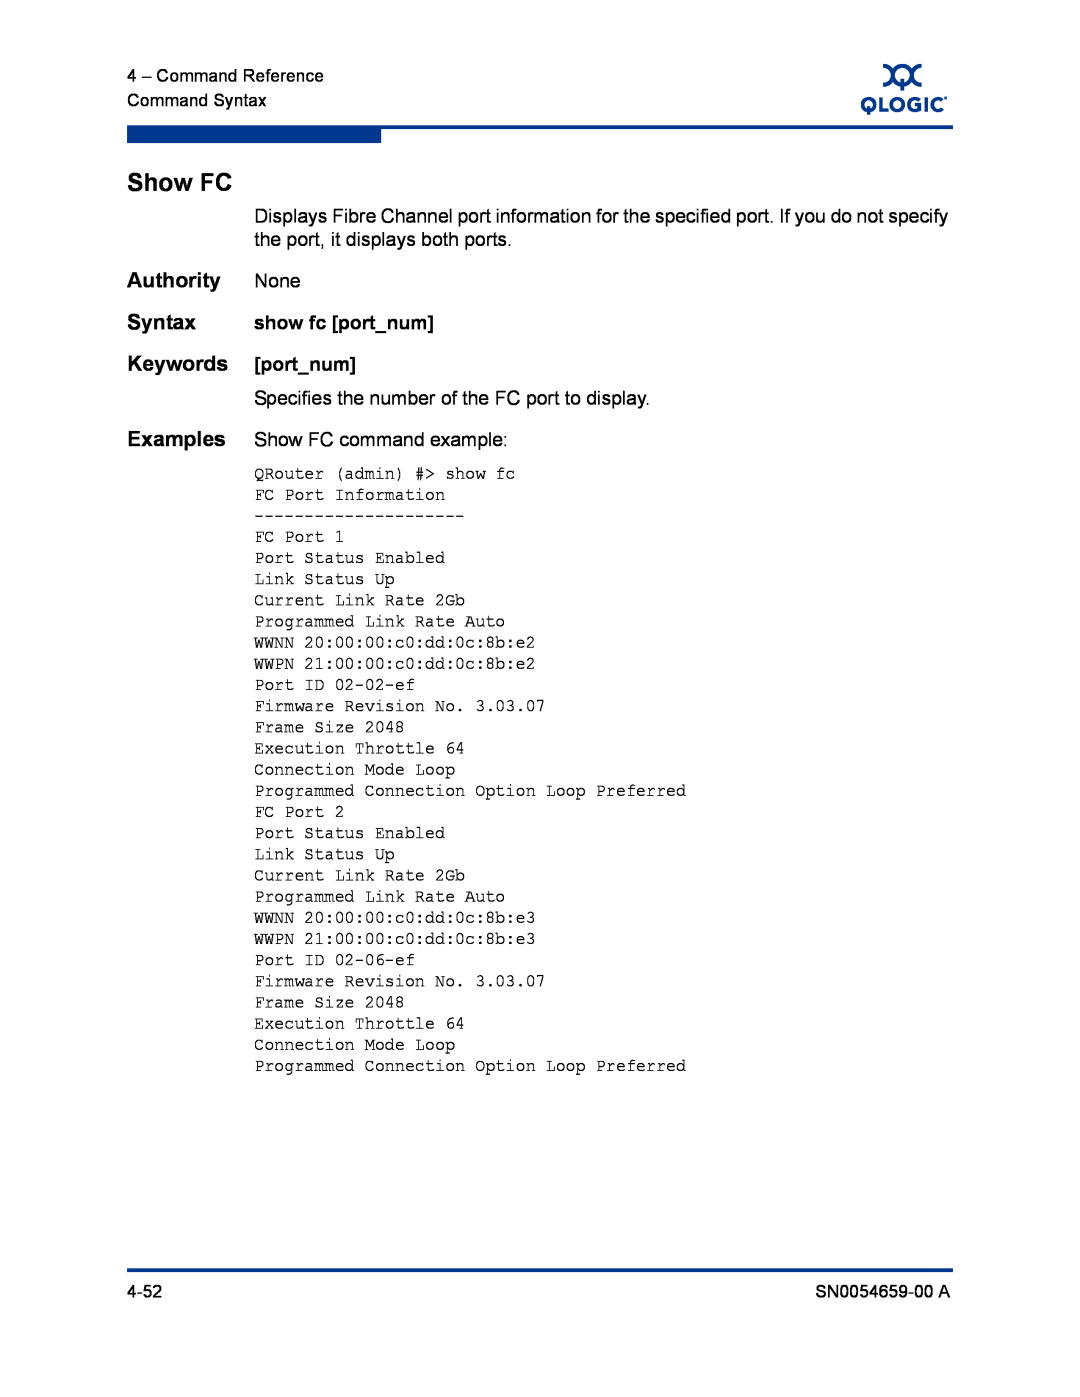 Q-Logic ISR6142 manual Show FC, Authority, Syntax, Keywords, Examples 